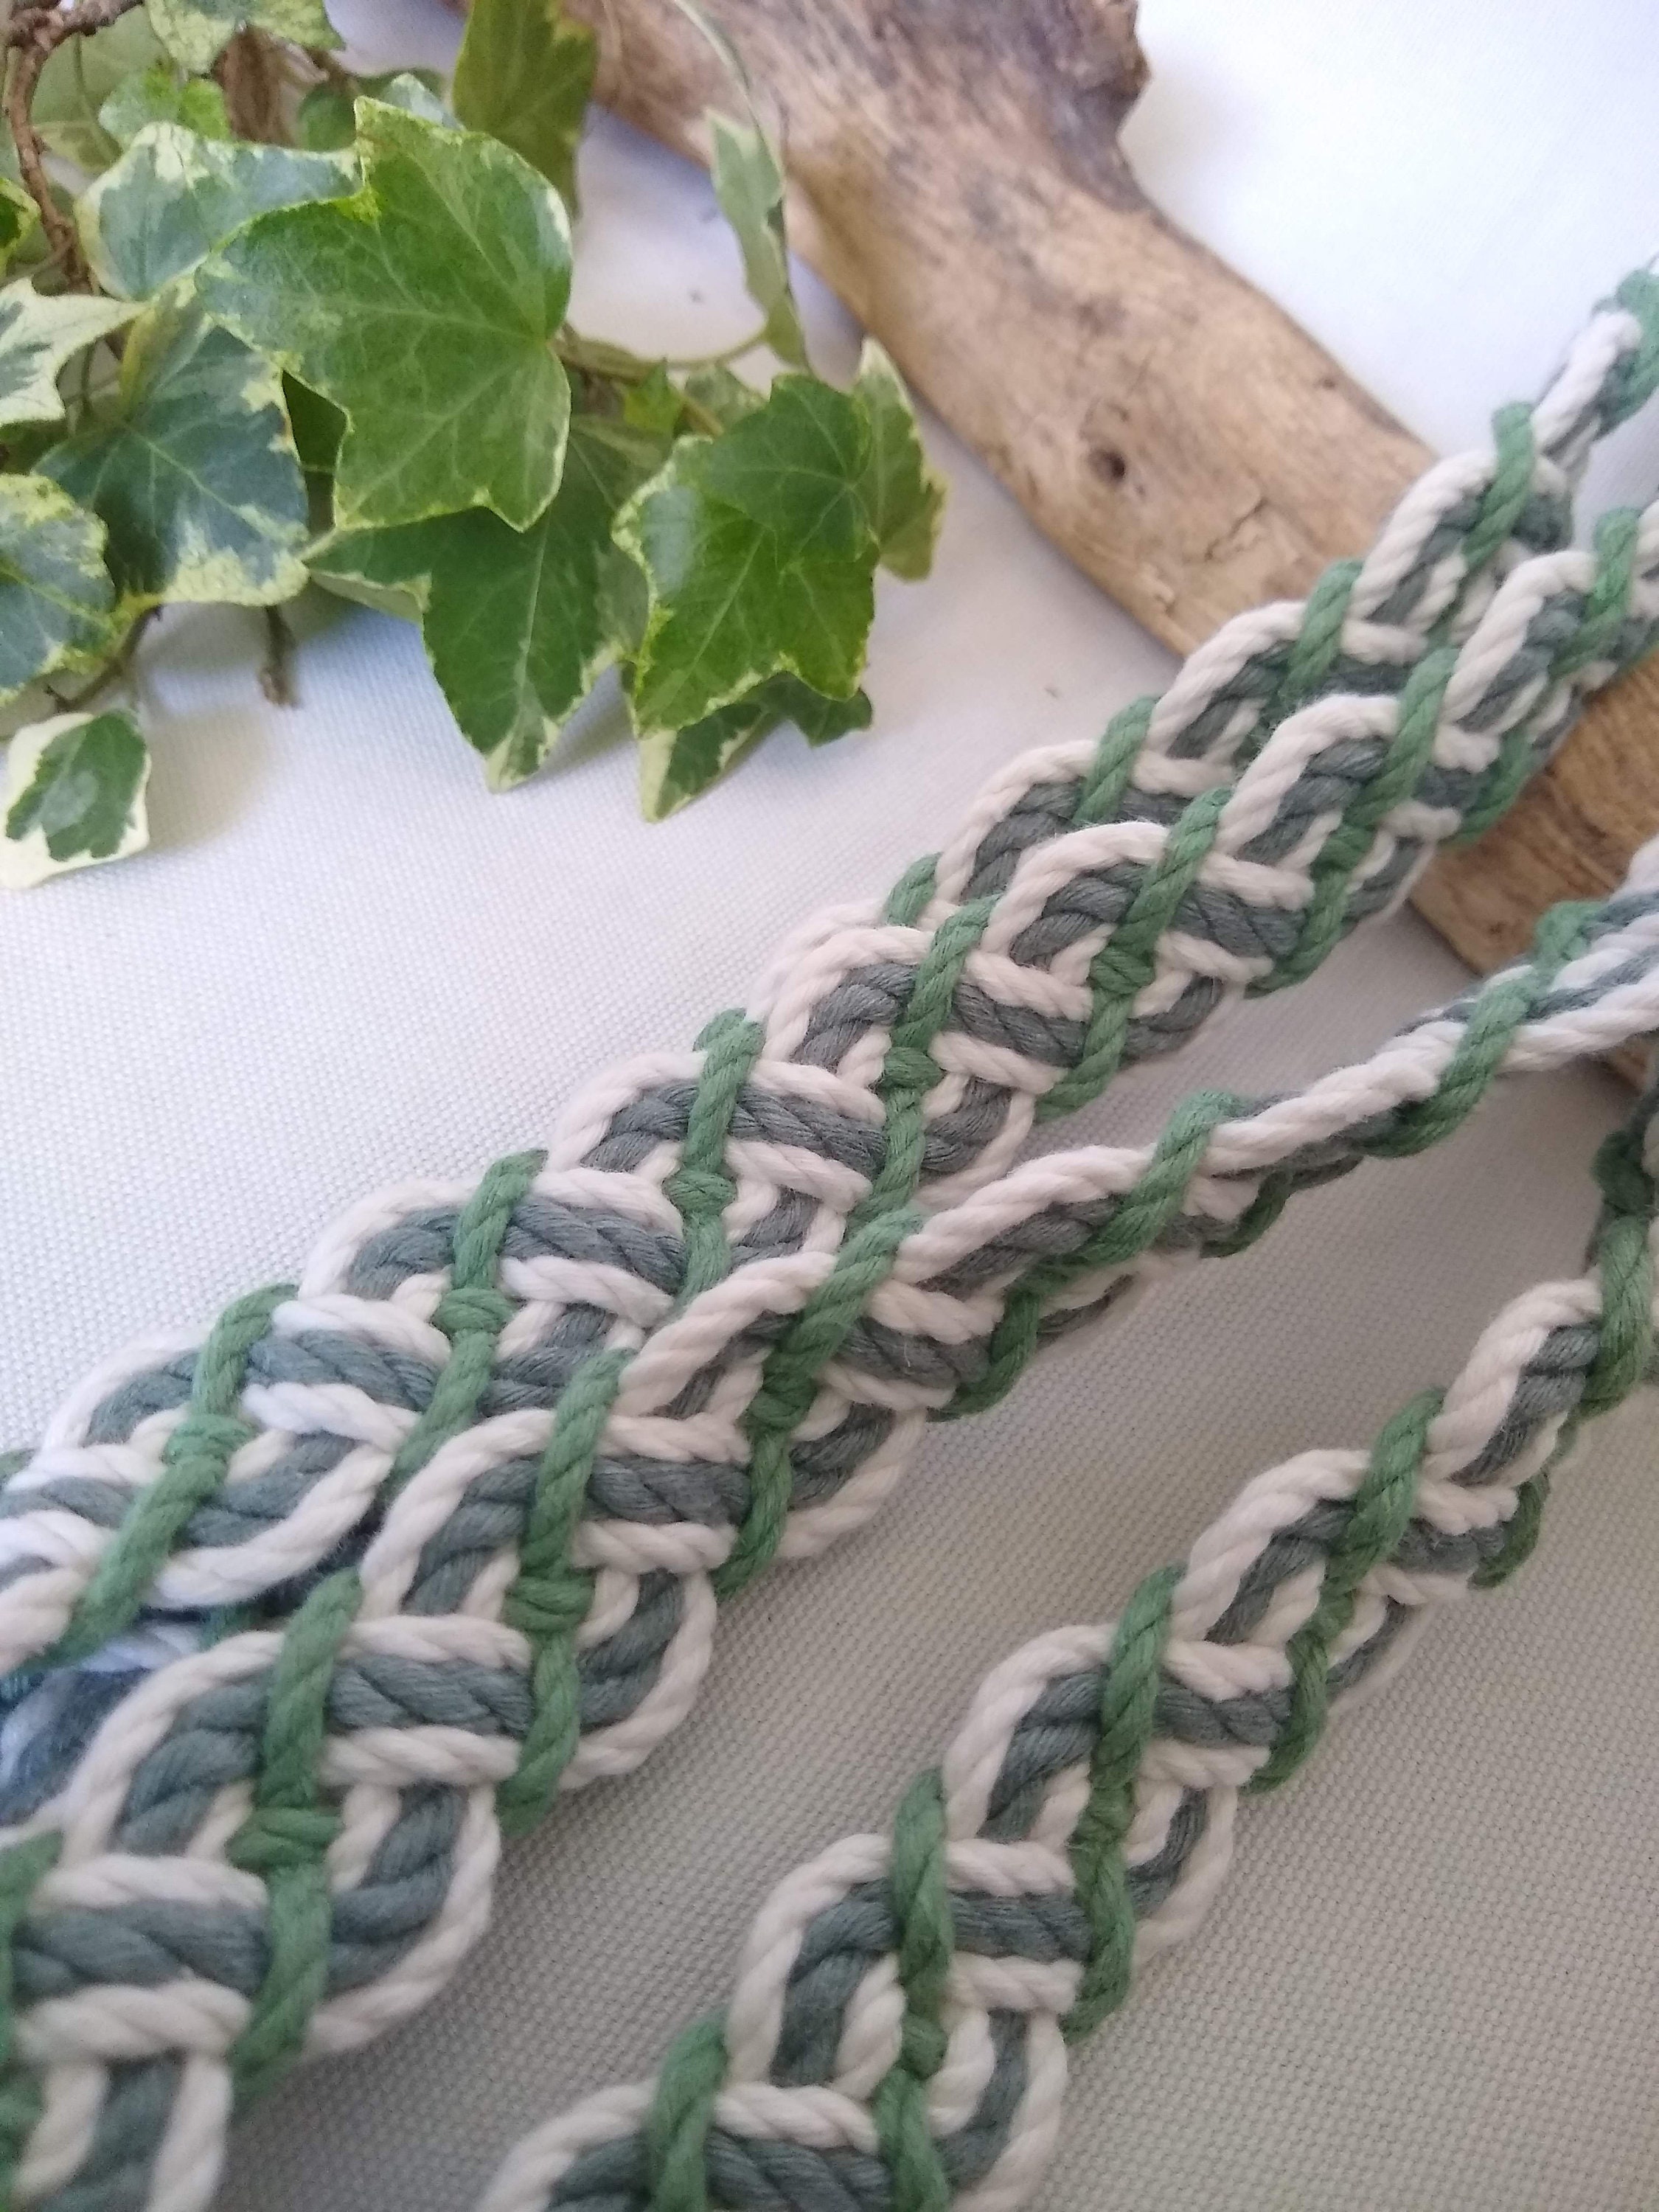 Celtic Forest Braided Handfasting Cord 100% Recycled Cotton Yarn